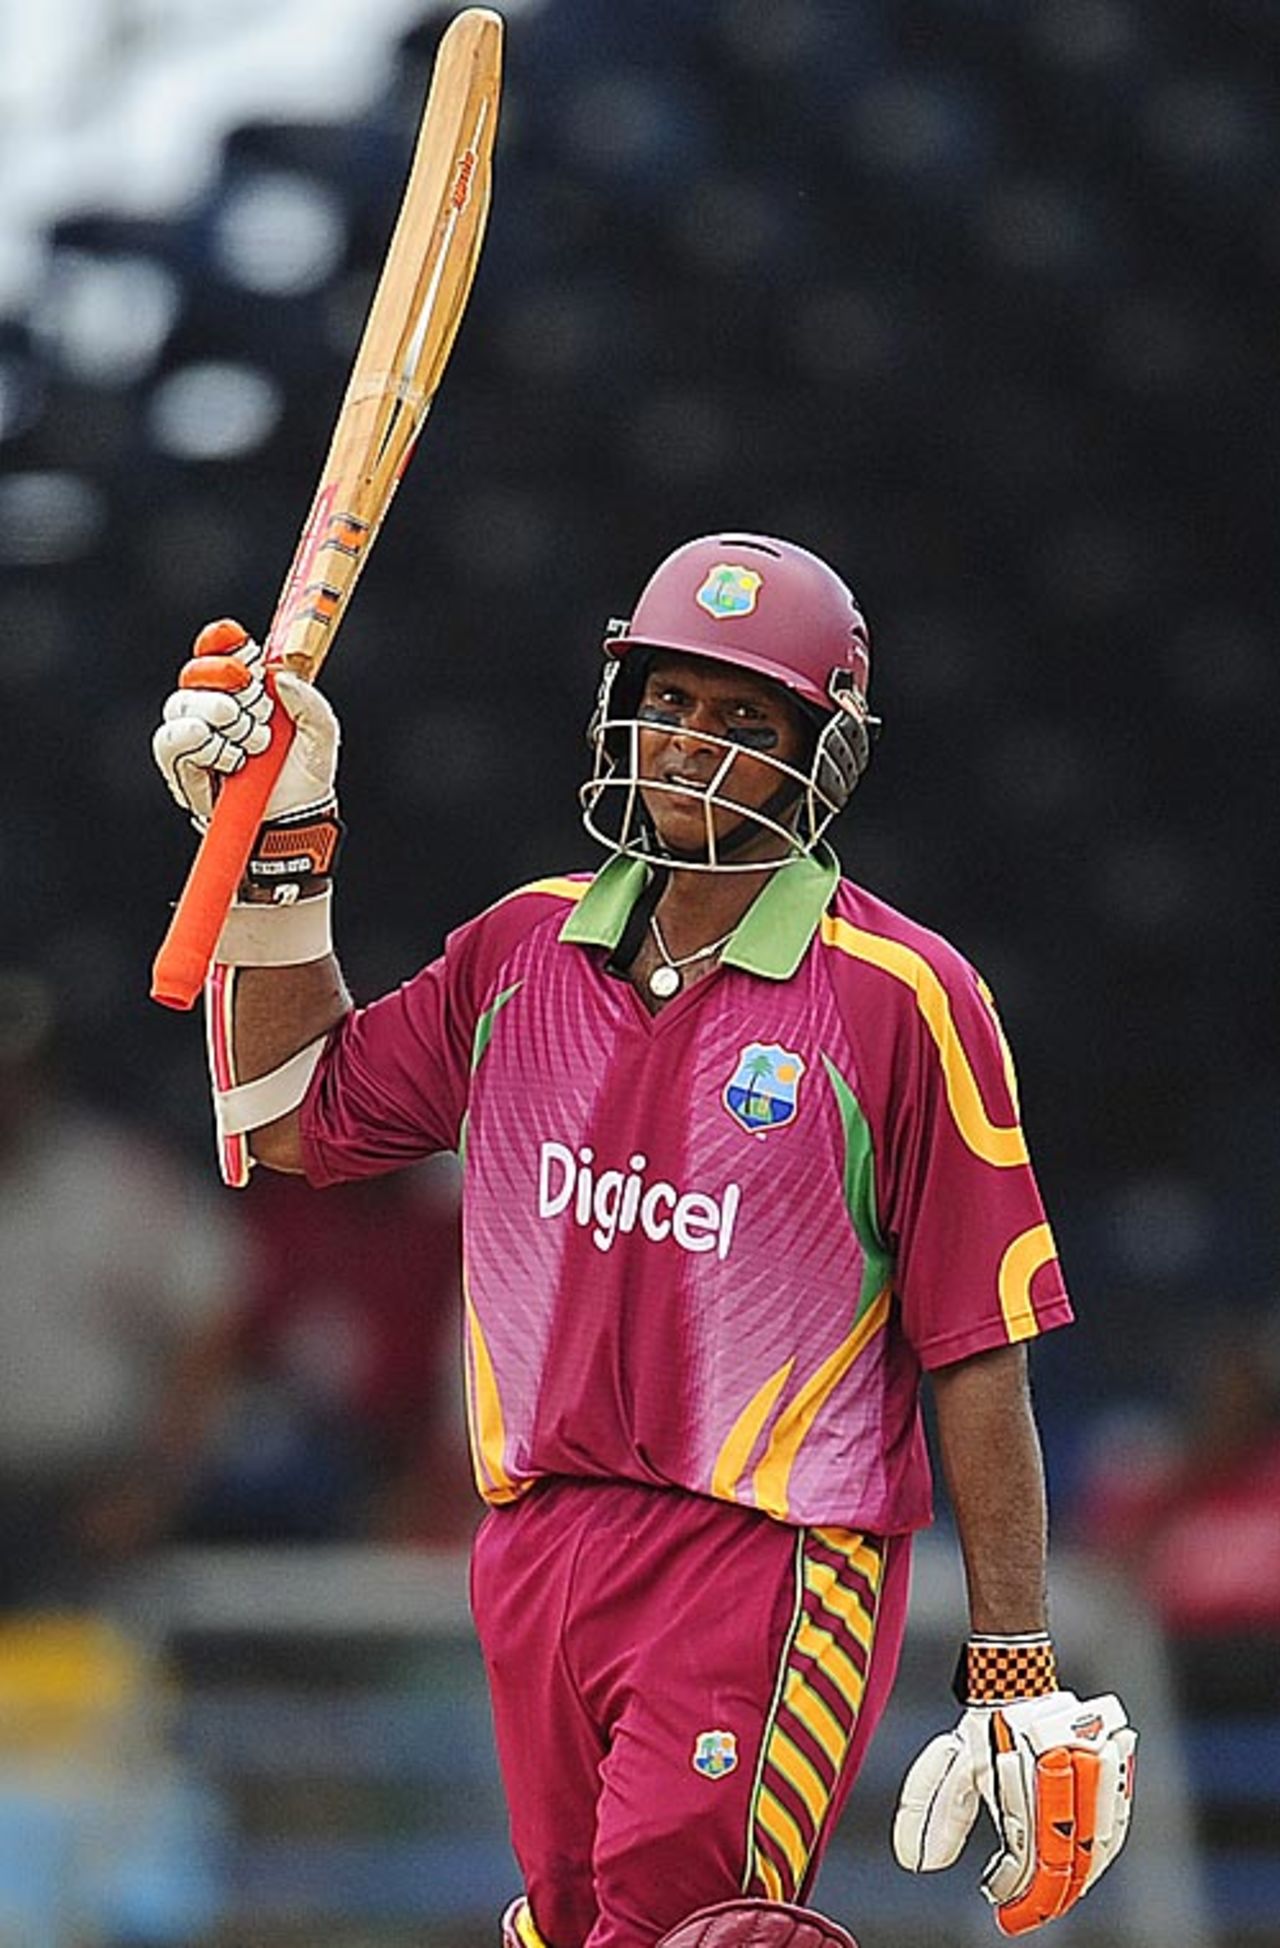 Shivnarine Chanderpaul scored his second half-century in successive matches, West Indies v South Africa, 5th ODI, Port of Spain, June 3, 2010